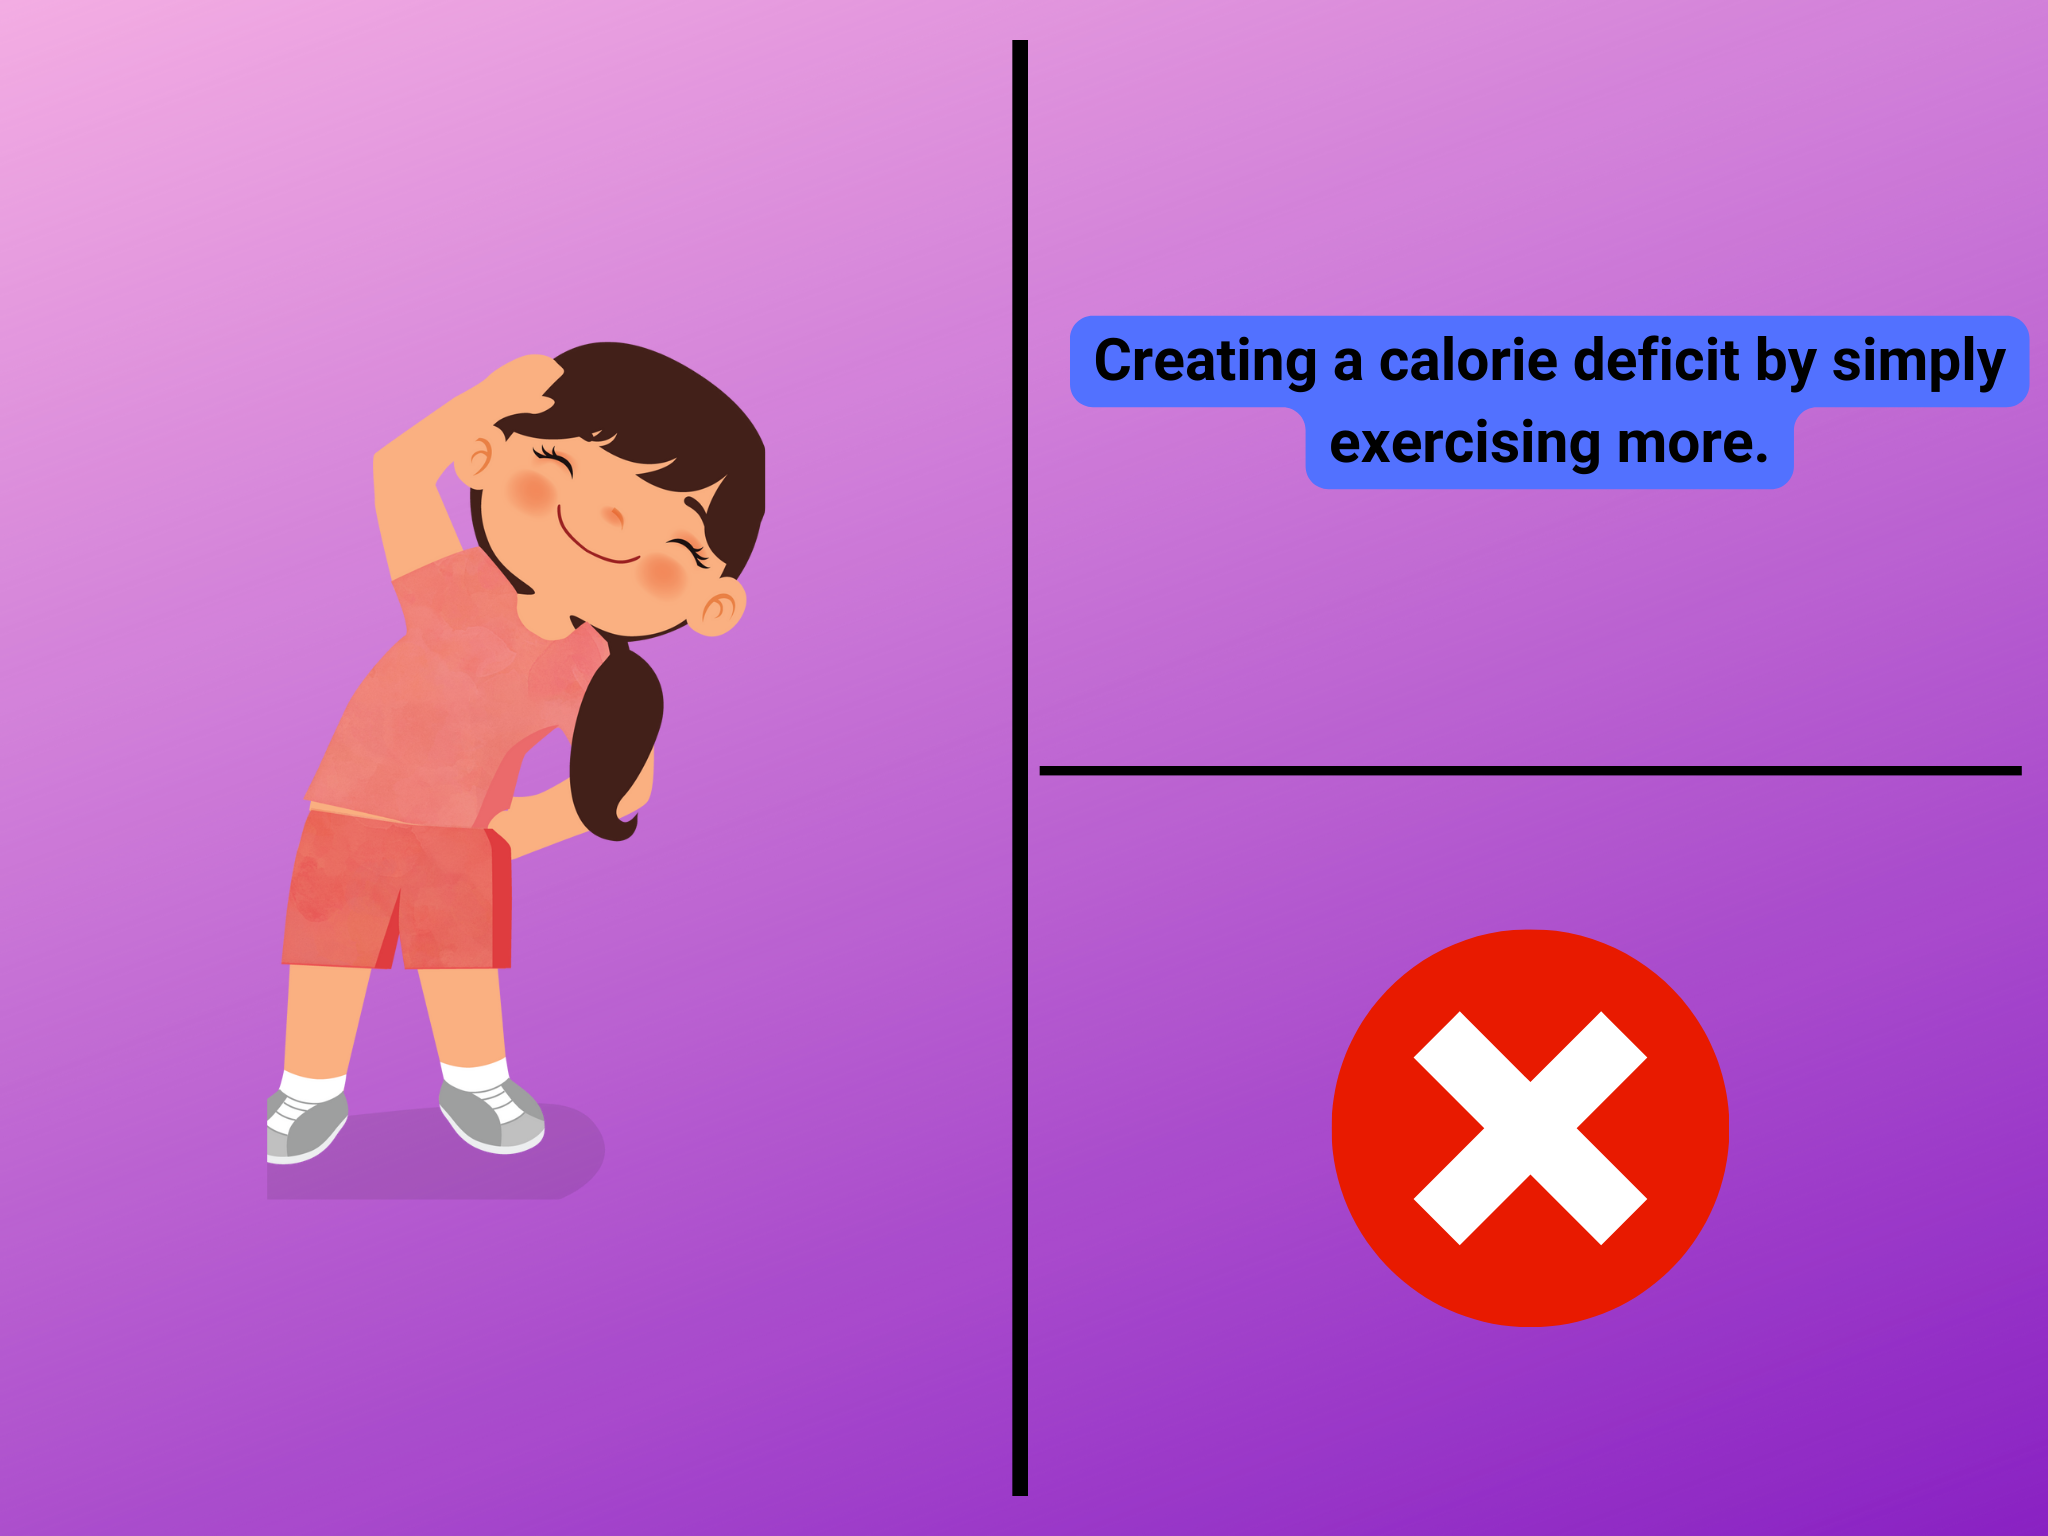 Creating a calorie deficit by simply exercising more